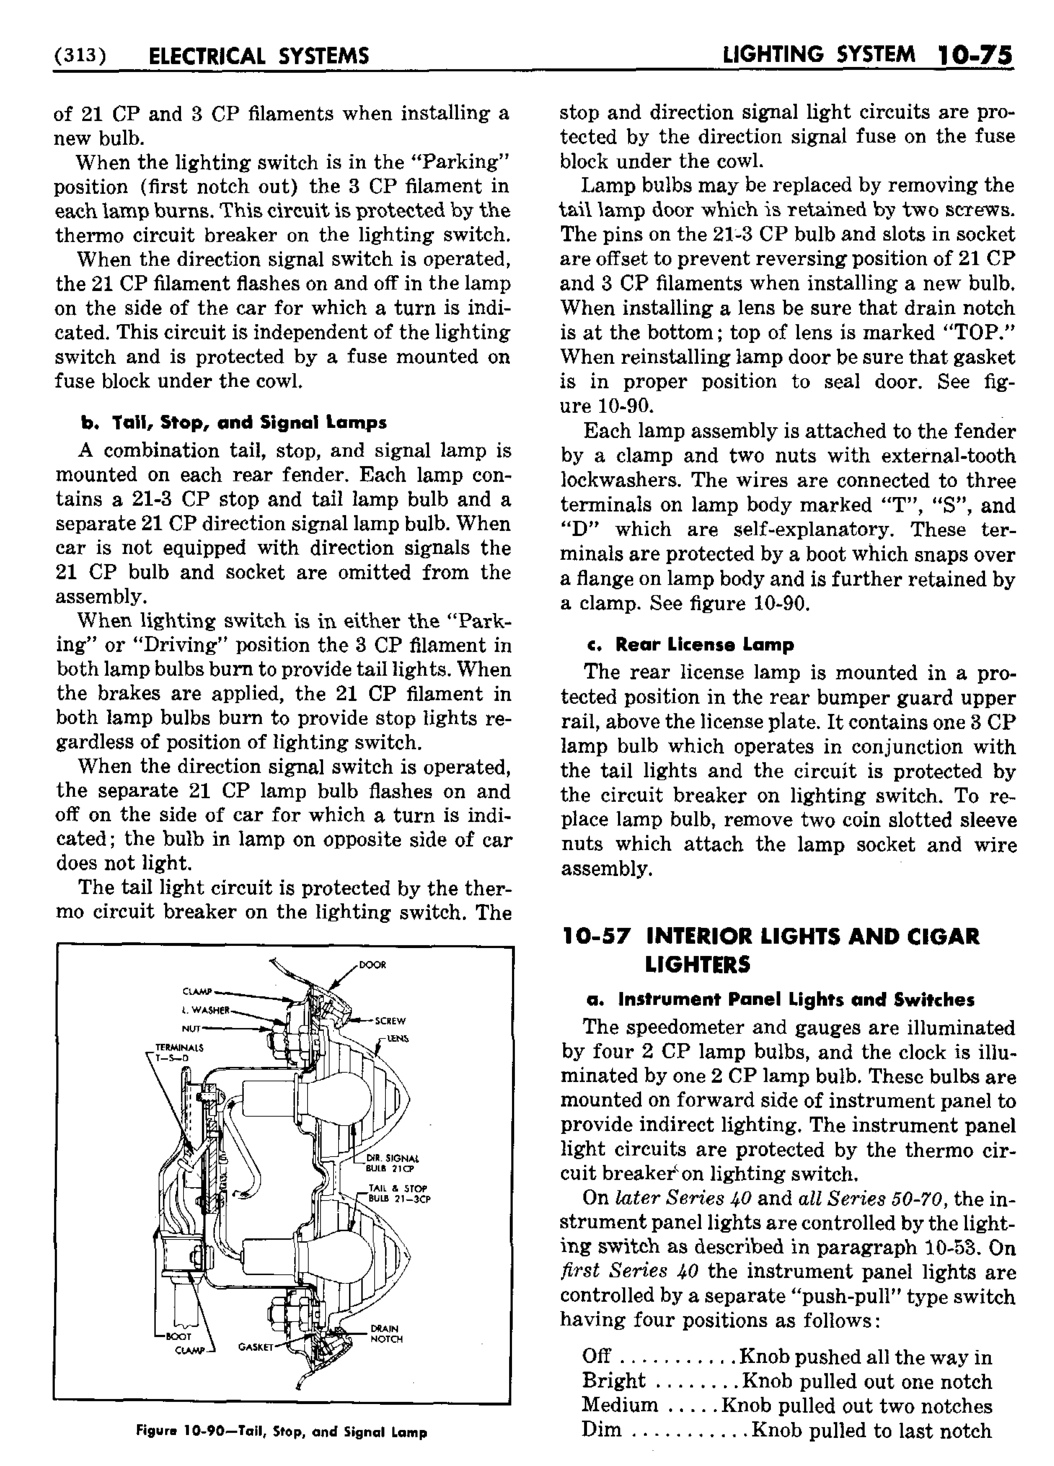 n_11 1950 Buick Shop Manual - Electrical Systems-075-075.jpg